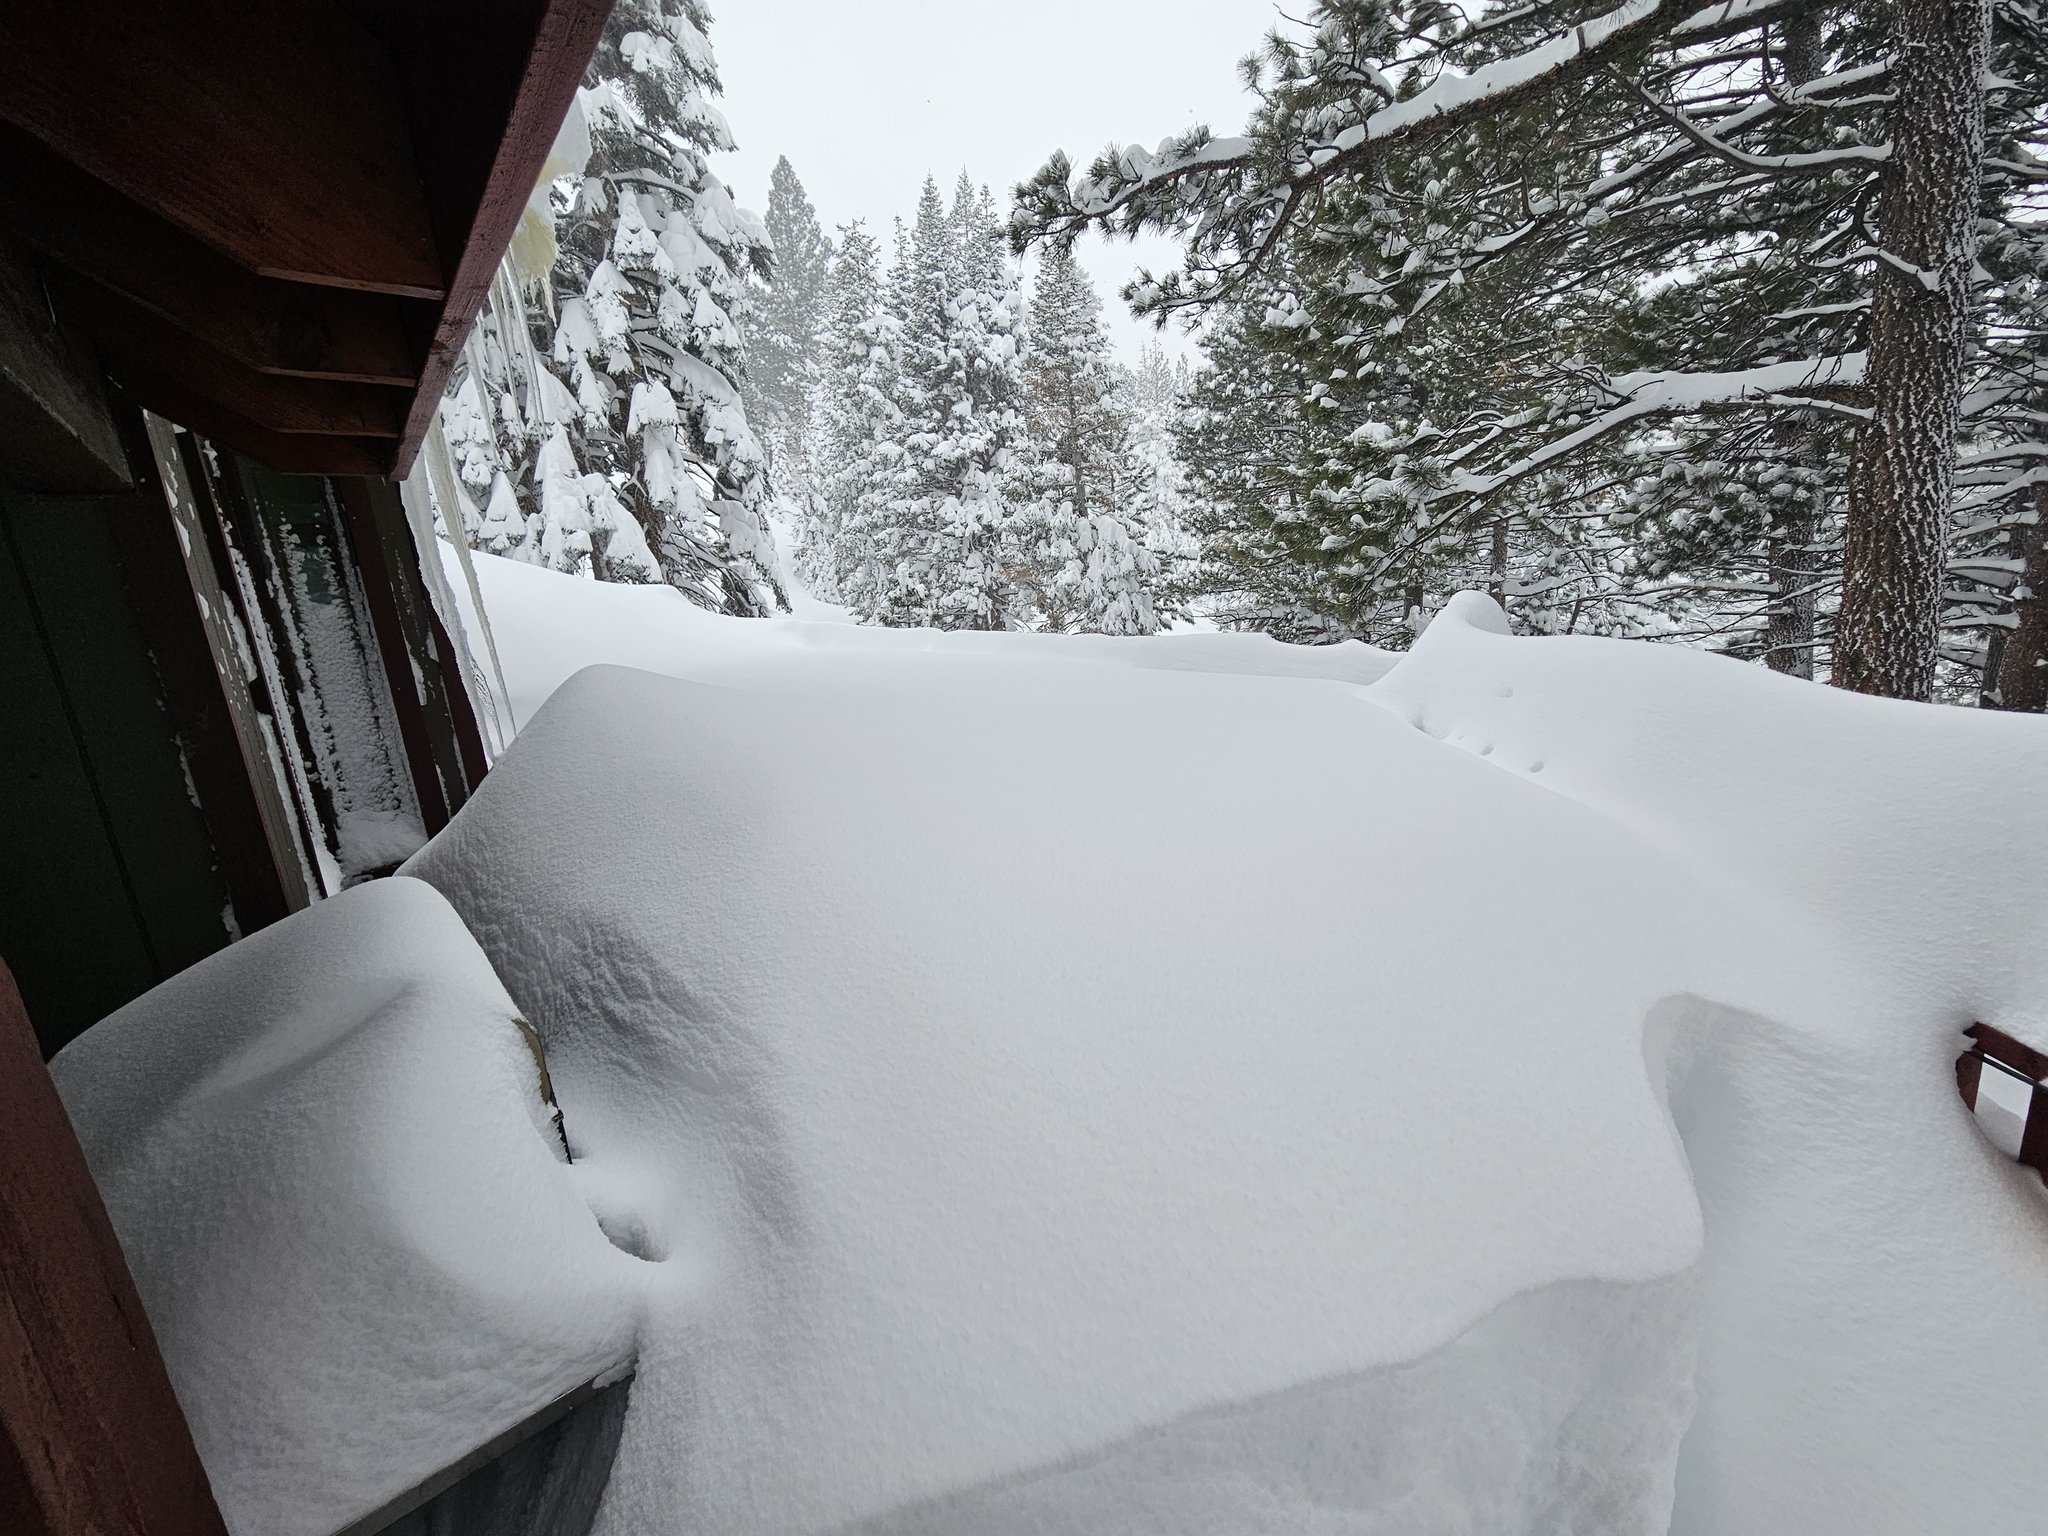 A heavy snow pack seen outside a home